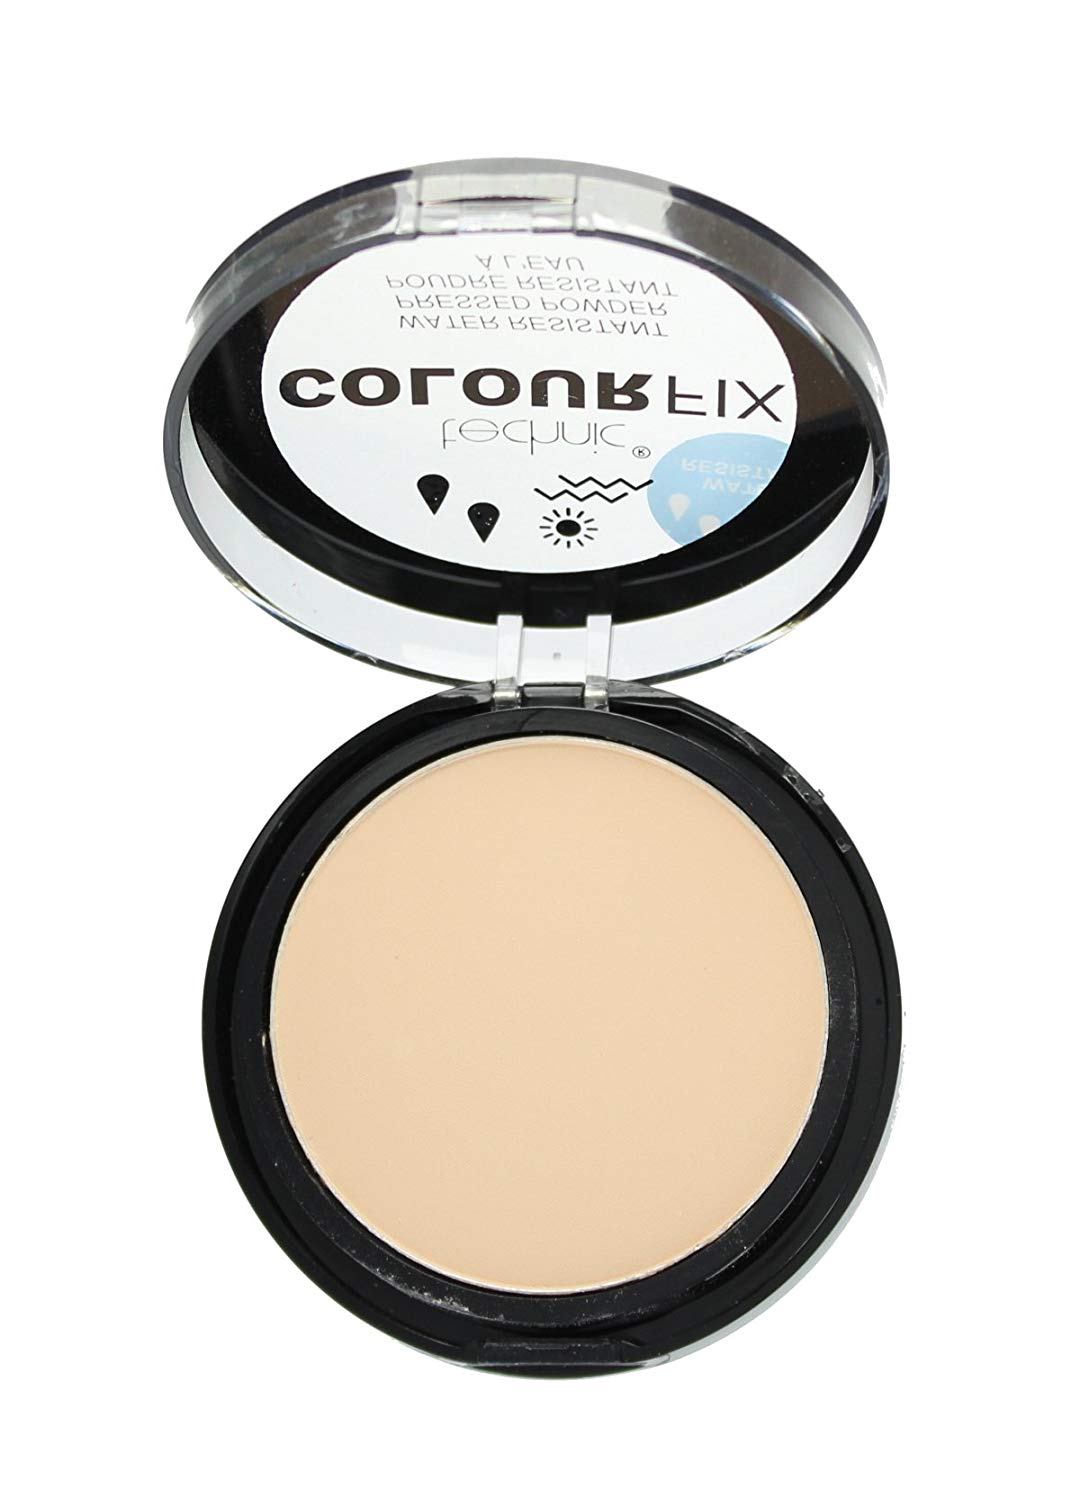 Technic Color Fix Water Resistant Pressed Powder Shade Bisque